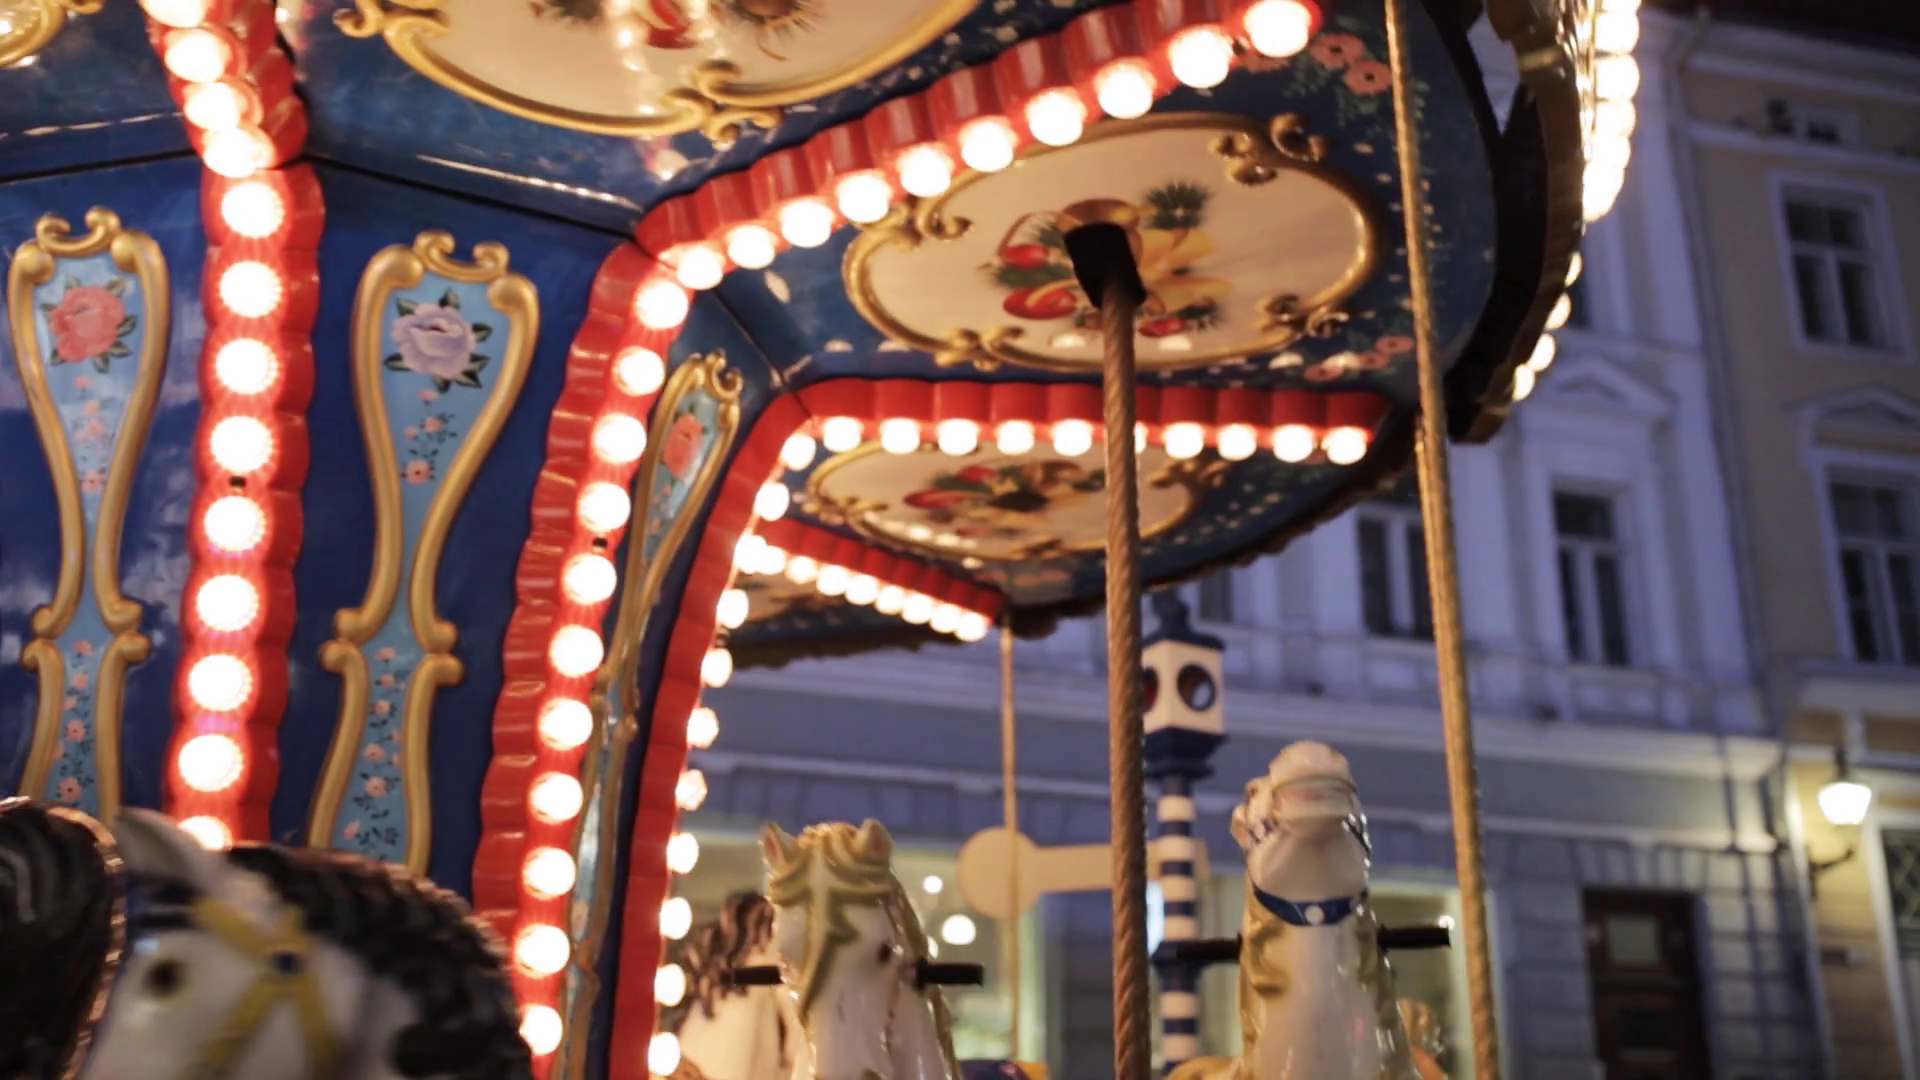 entertainment and amusement concept - illuminated carousel in old ...